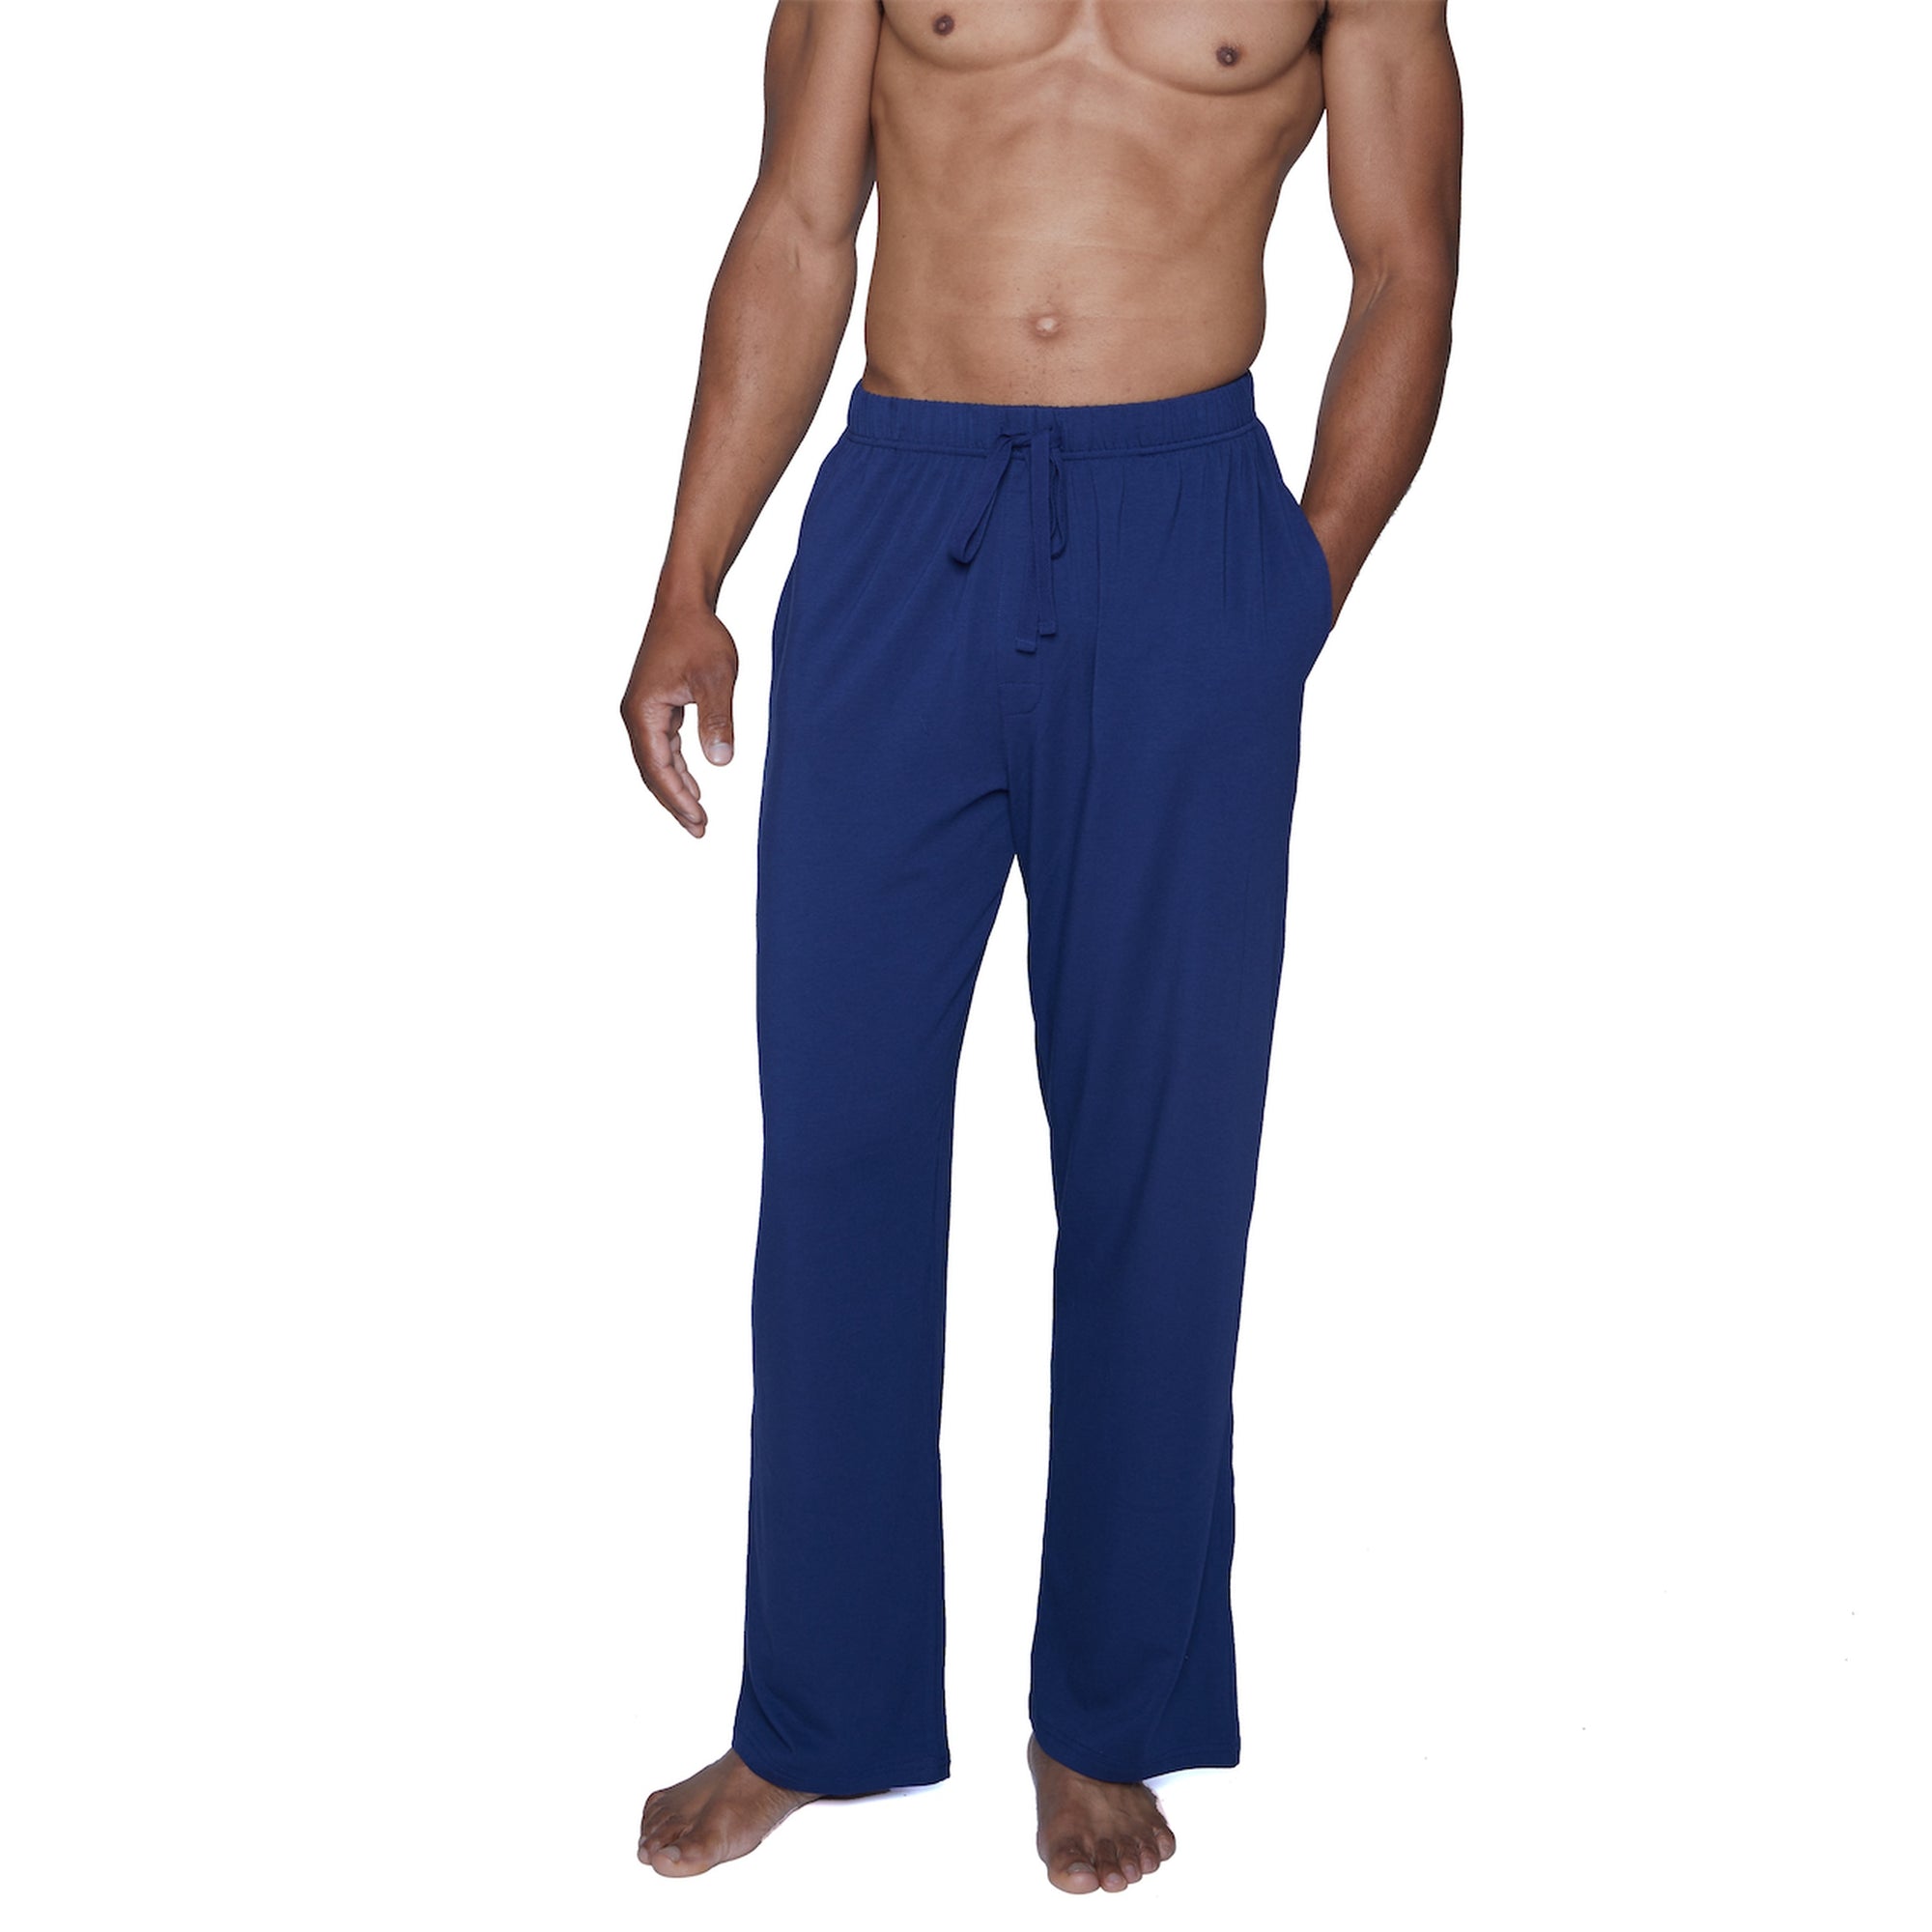 Lounge Pant with Draw String in Deep Space Blue by Wood Underwear